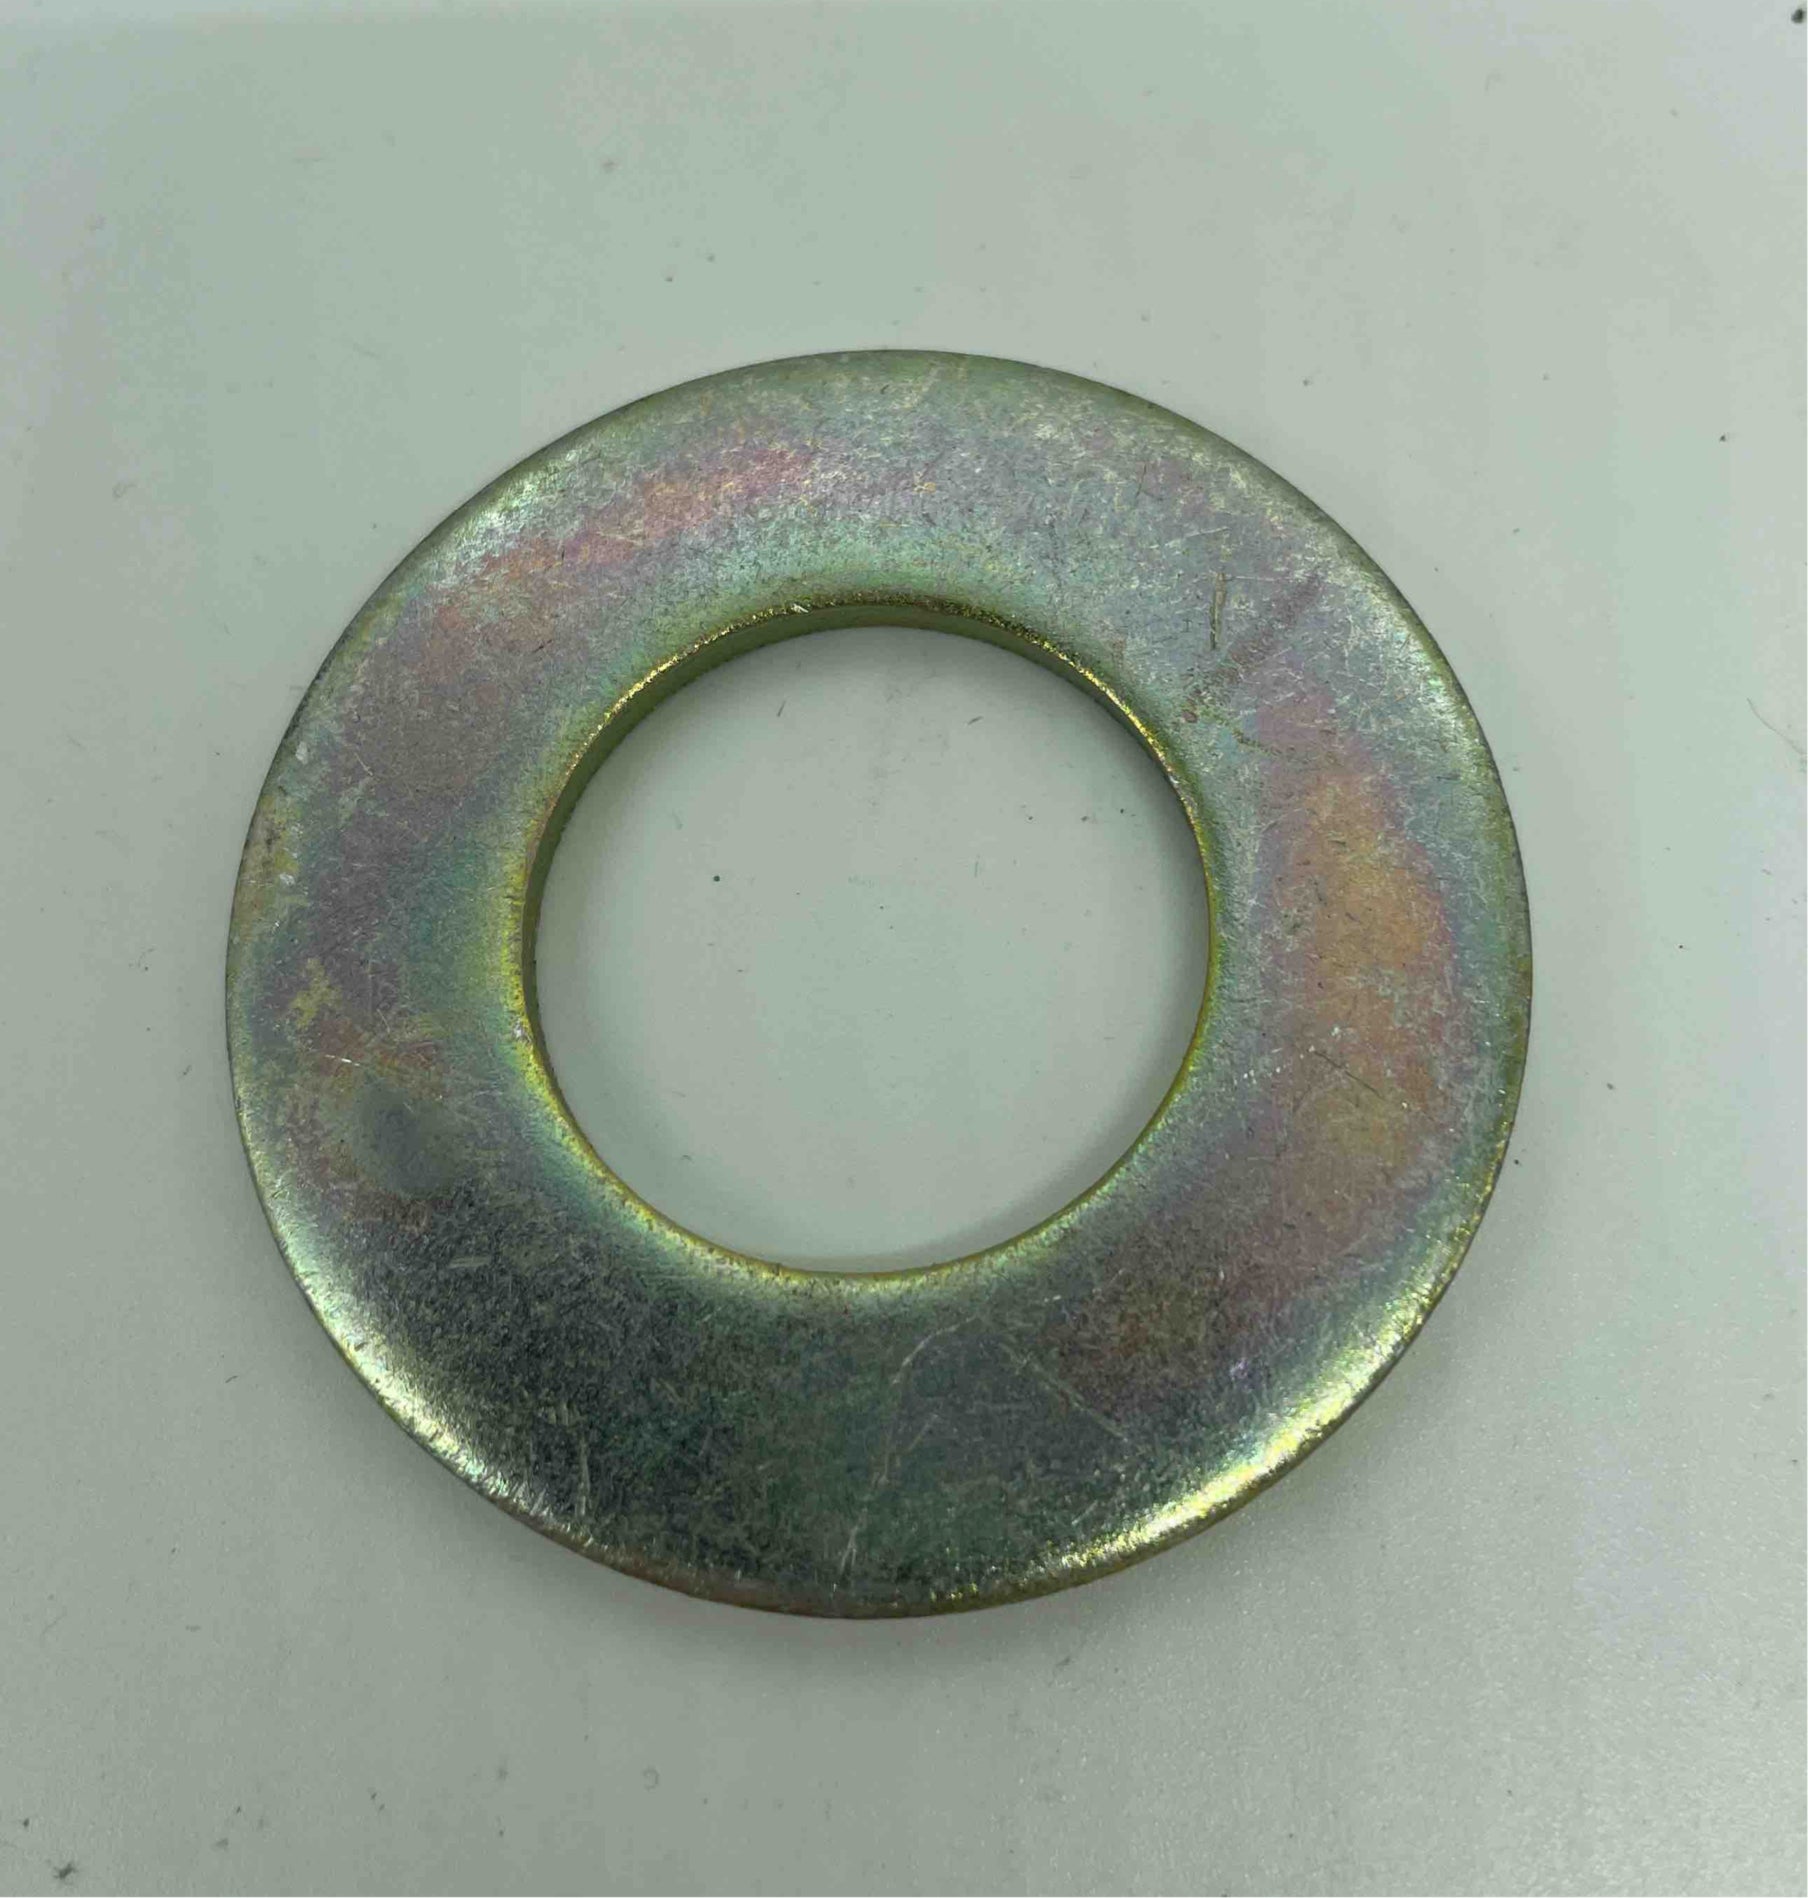 Washer flat 1/2" 

1/2" ID FLAT WASHER FOR ASSY 70360
425144 